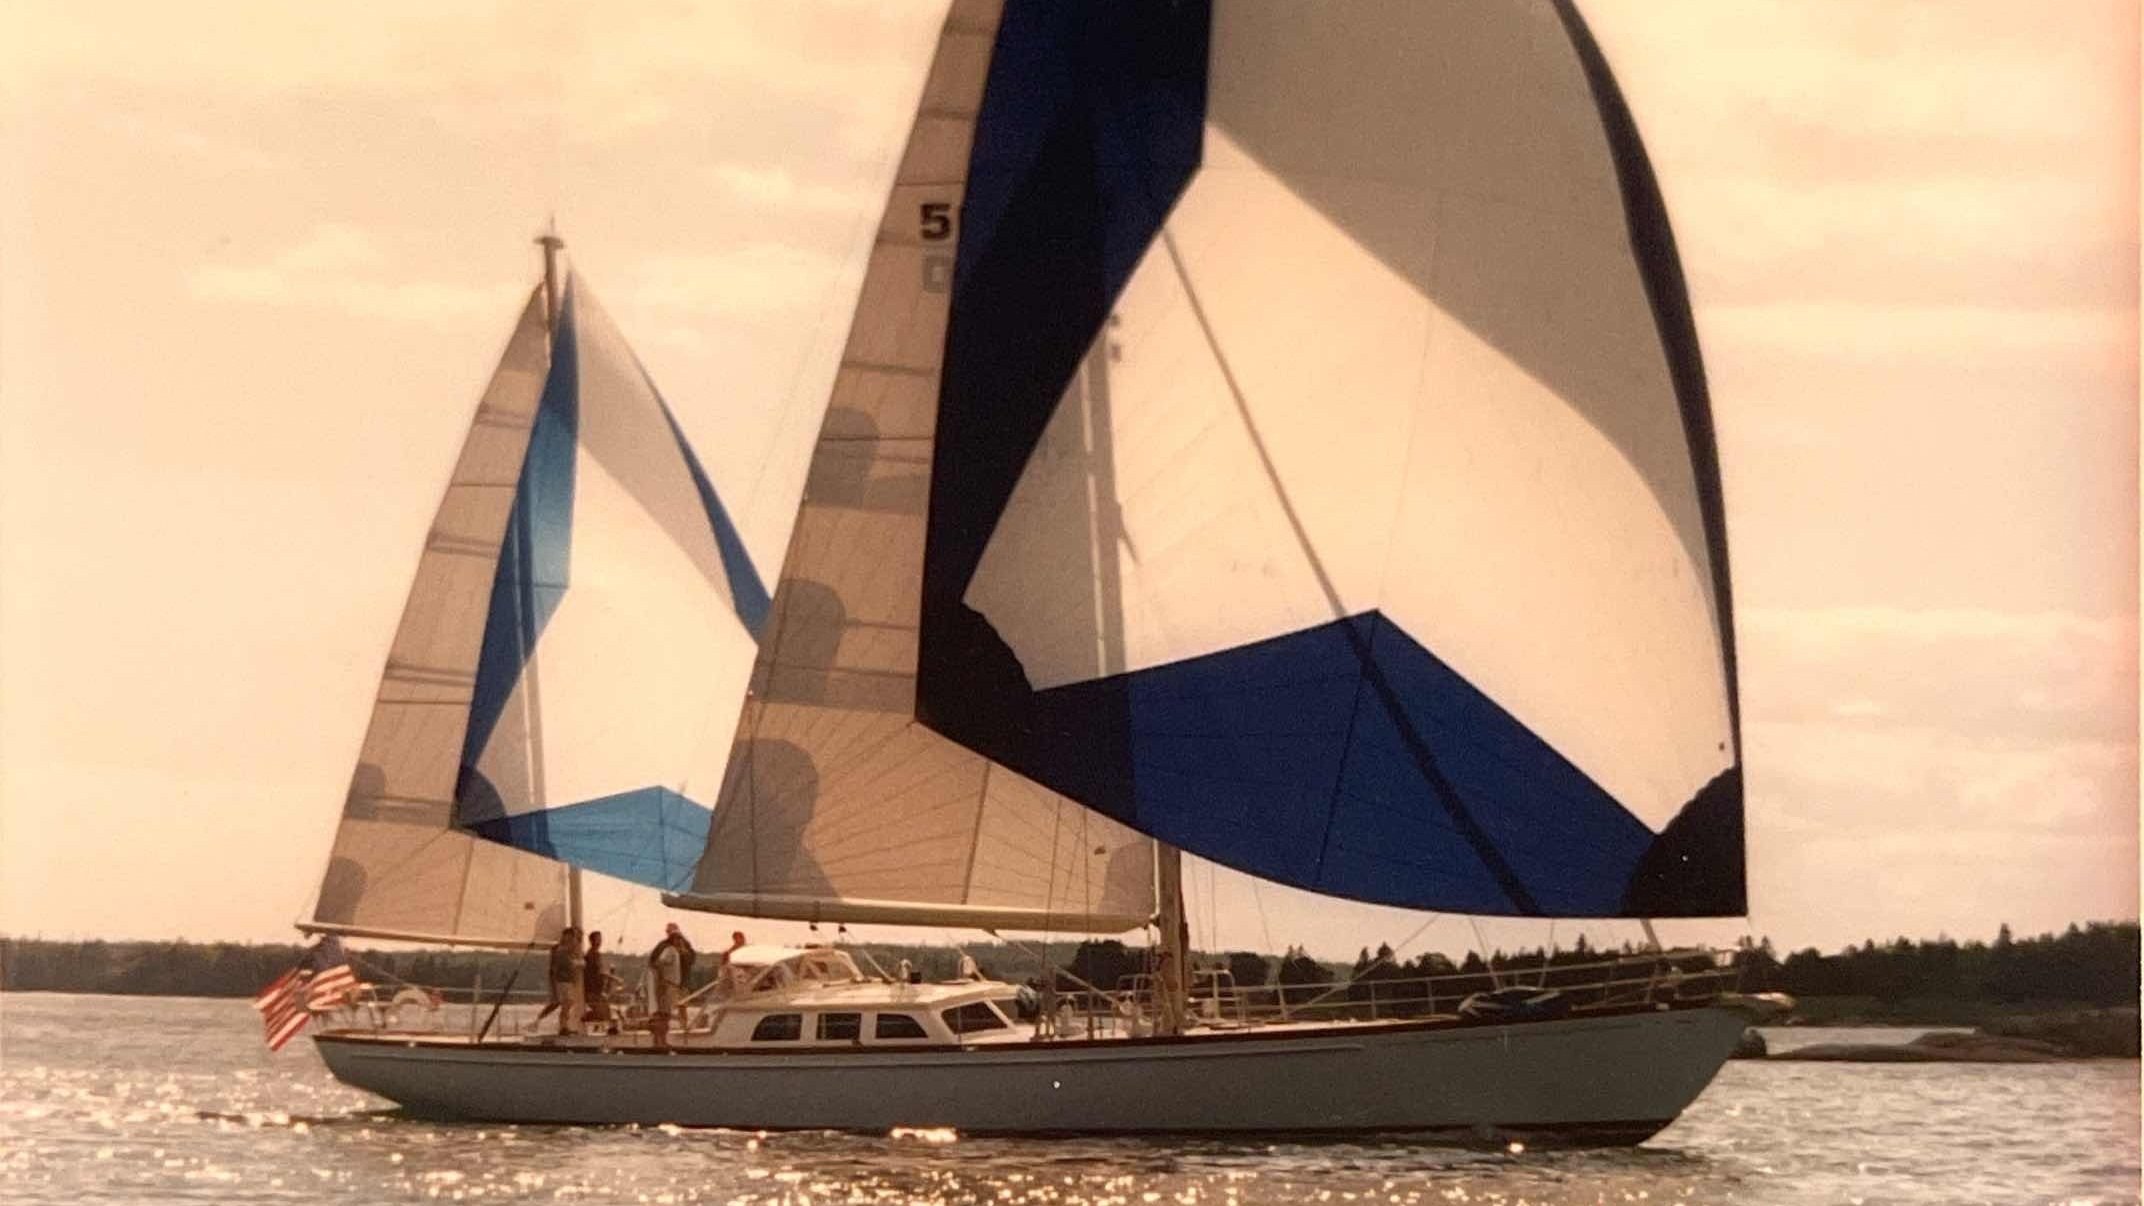 At+sea+with+Spinnaker.jpg